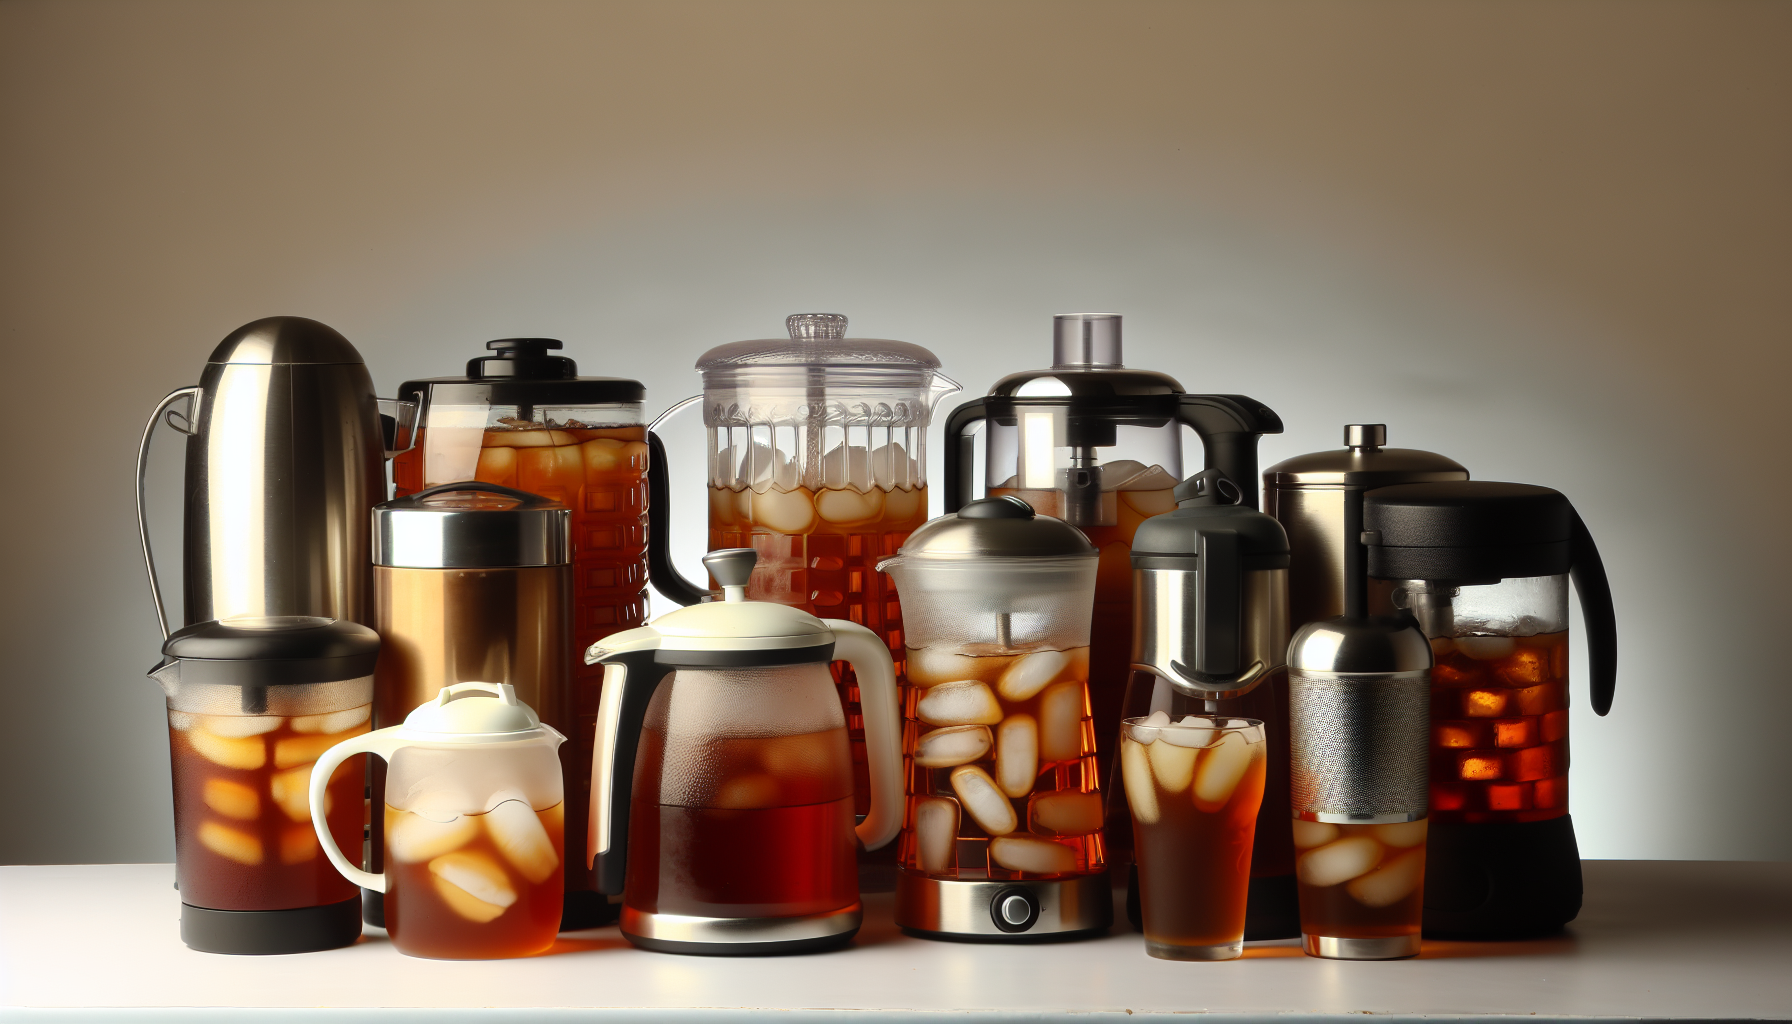 Variety of iced tea makers